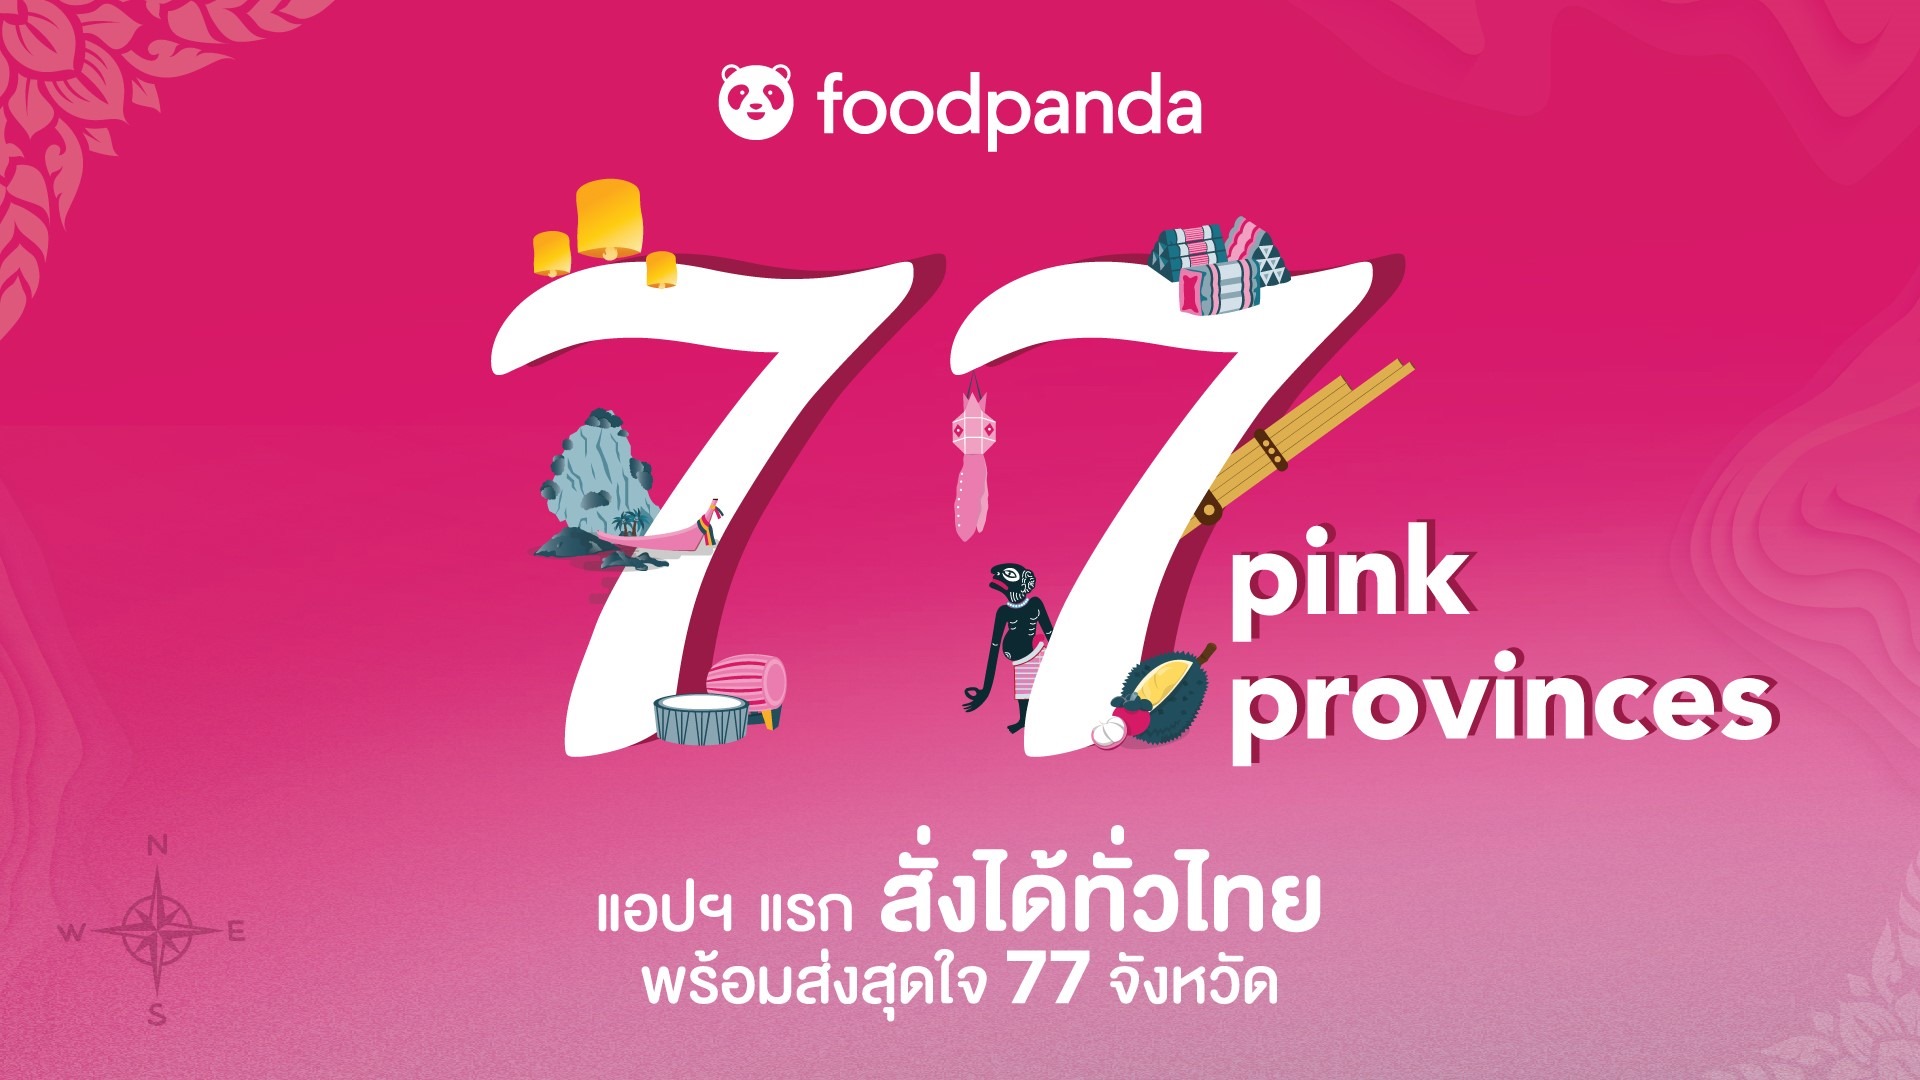 foodpanda announces nationwide coverage in Thailand